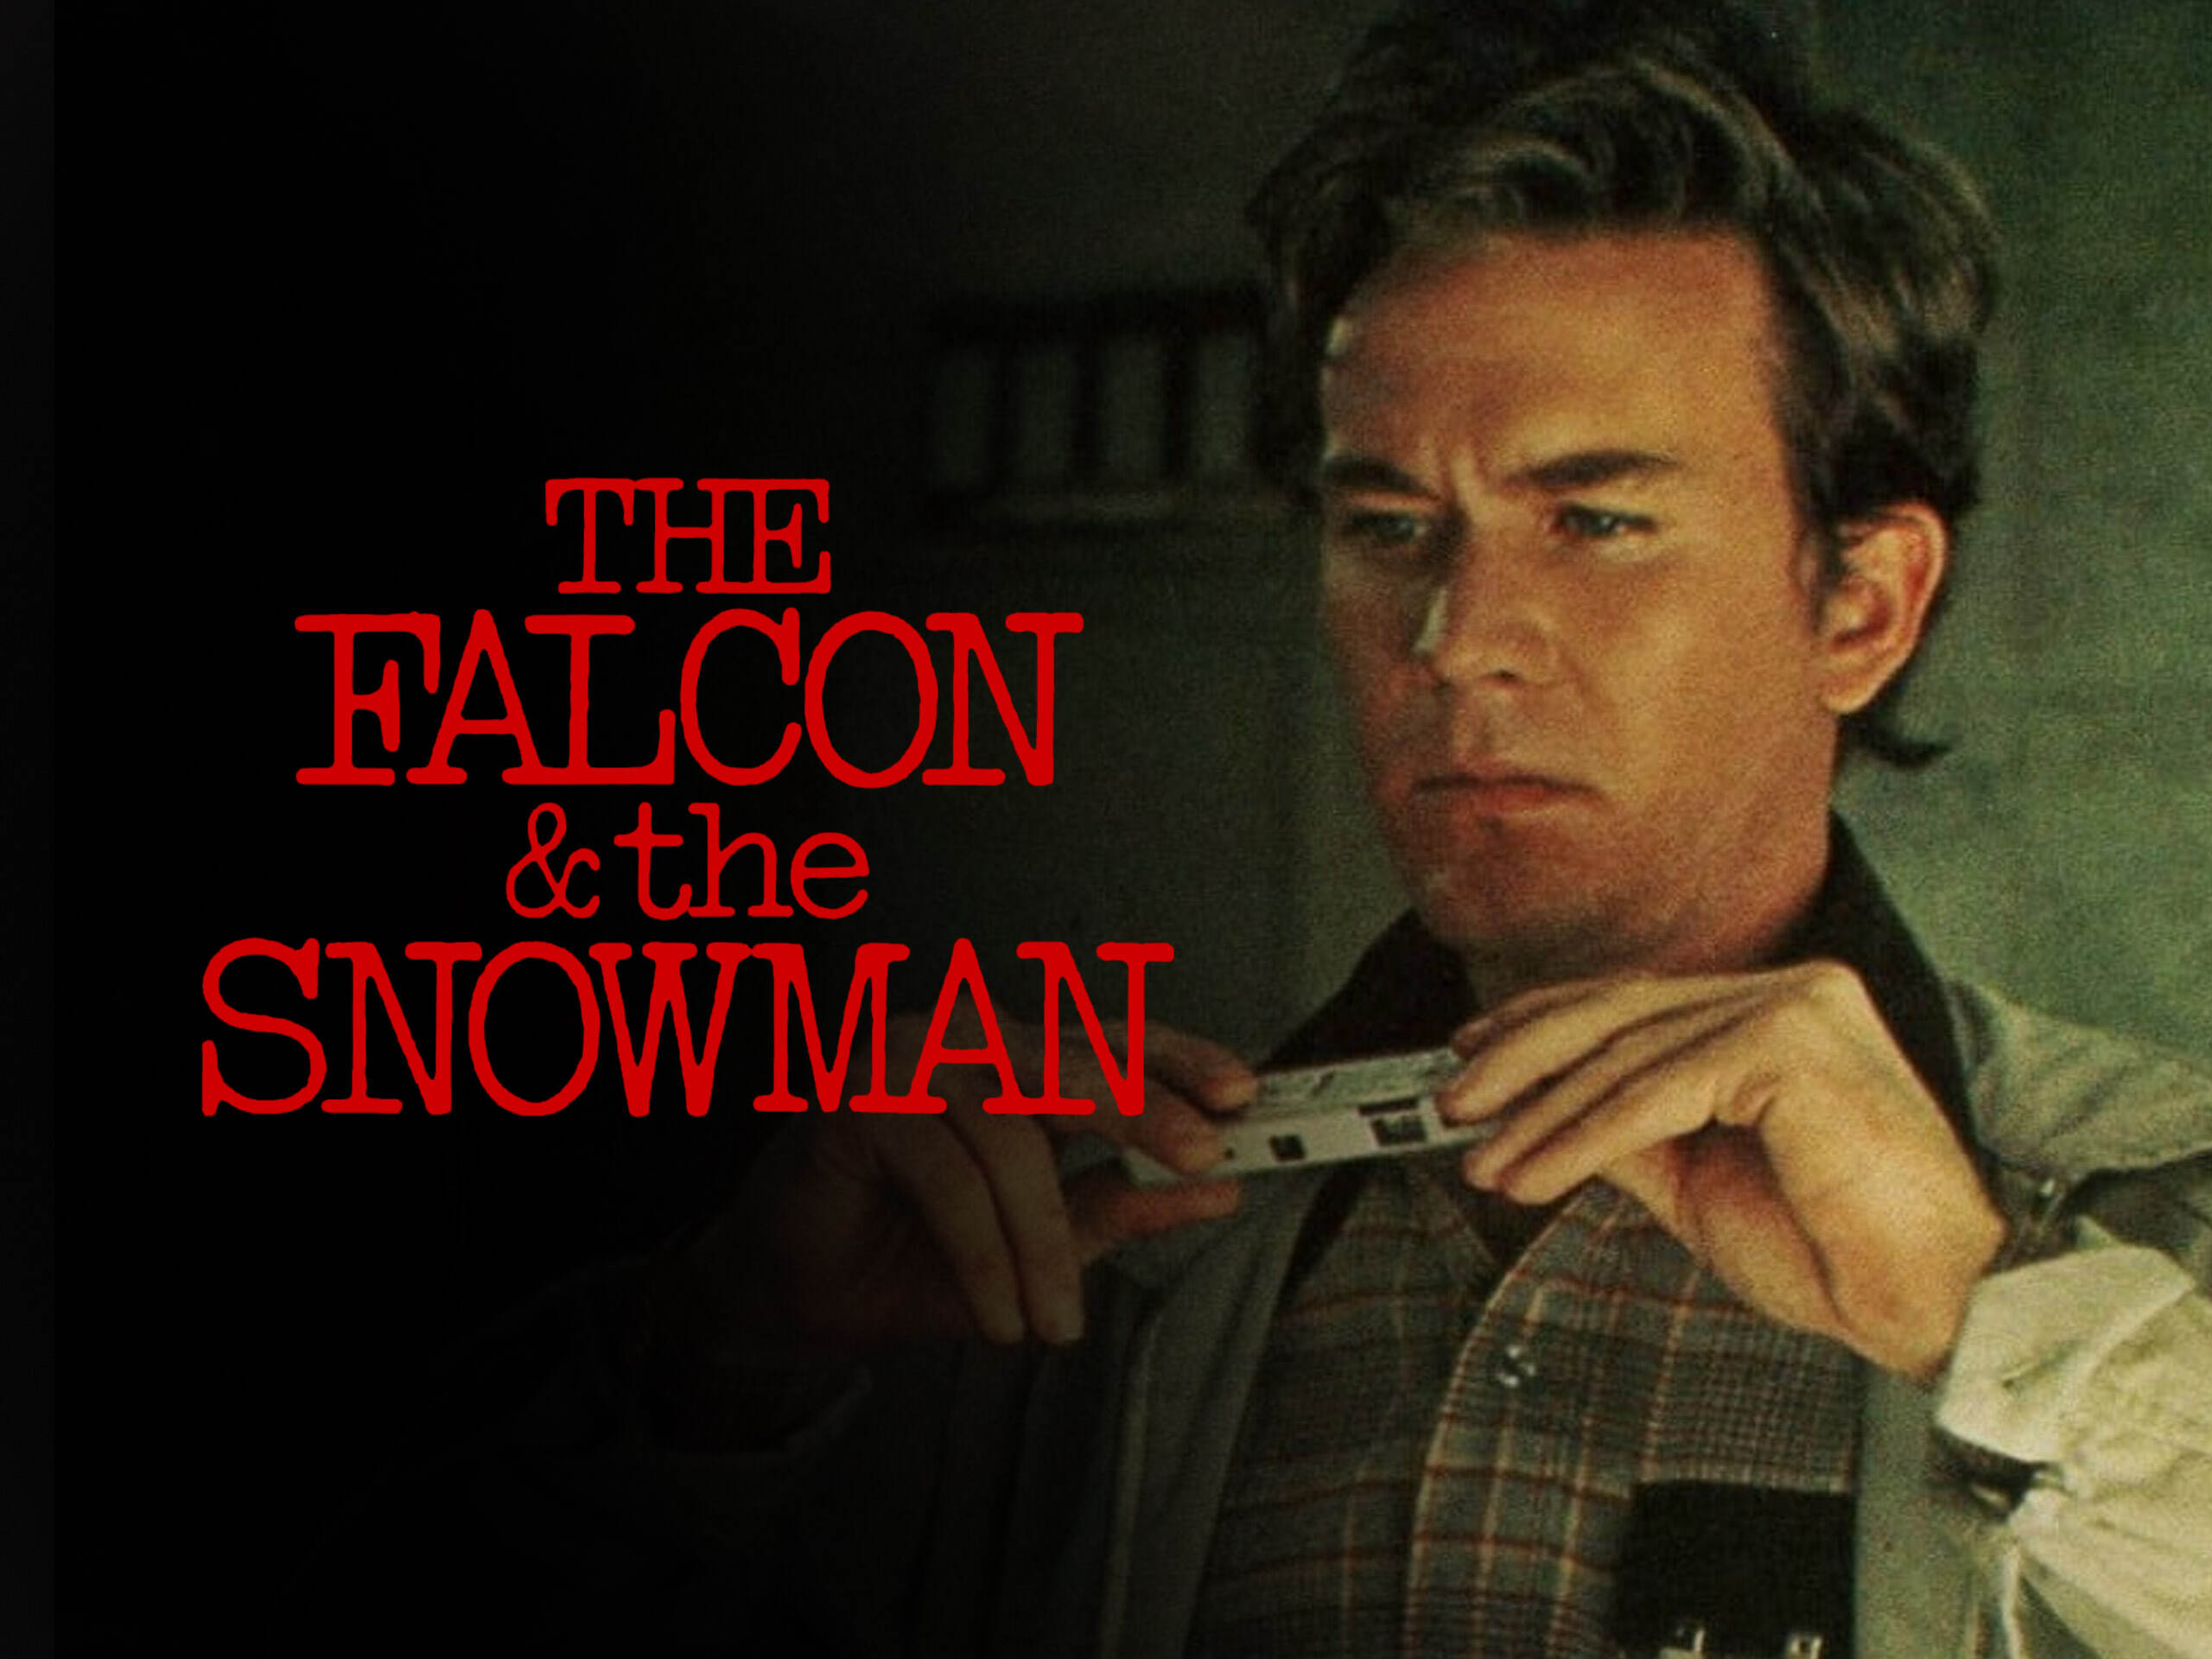 44-facts-about-the-movie-the-falcon-and-the-snowman